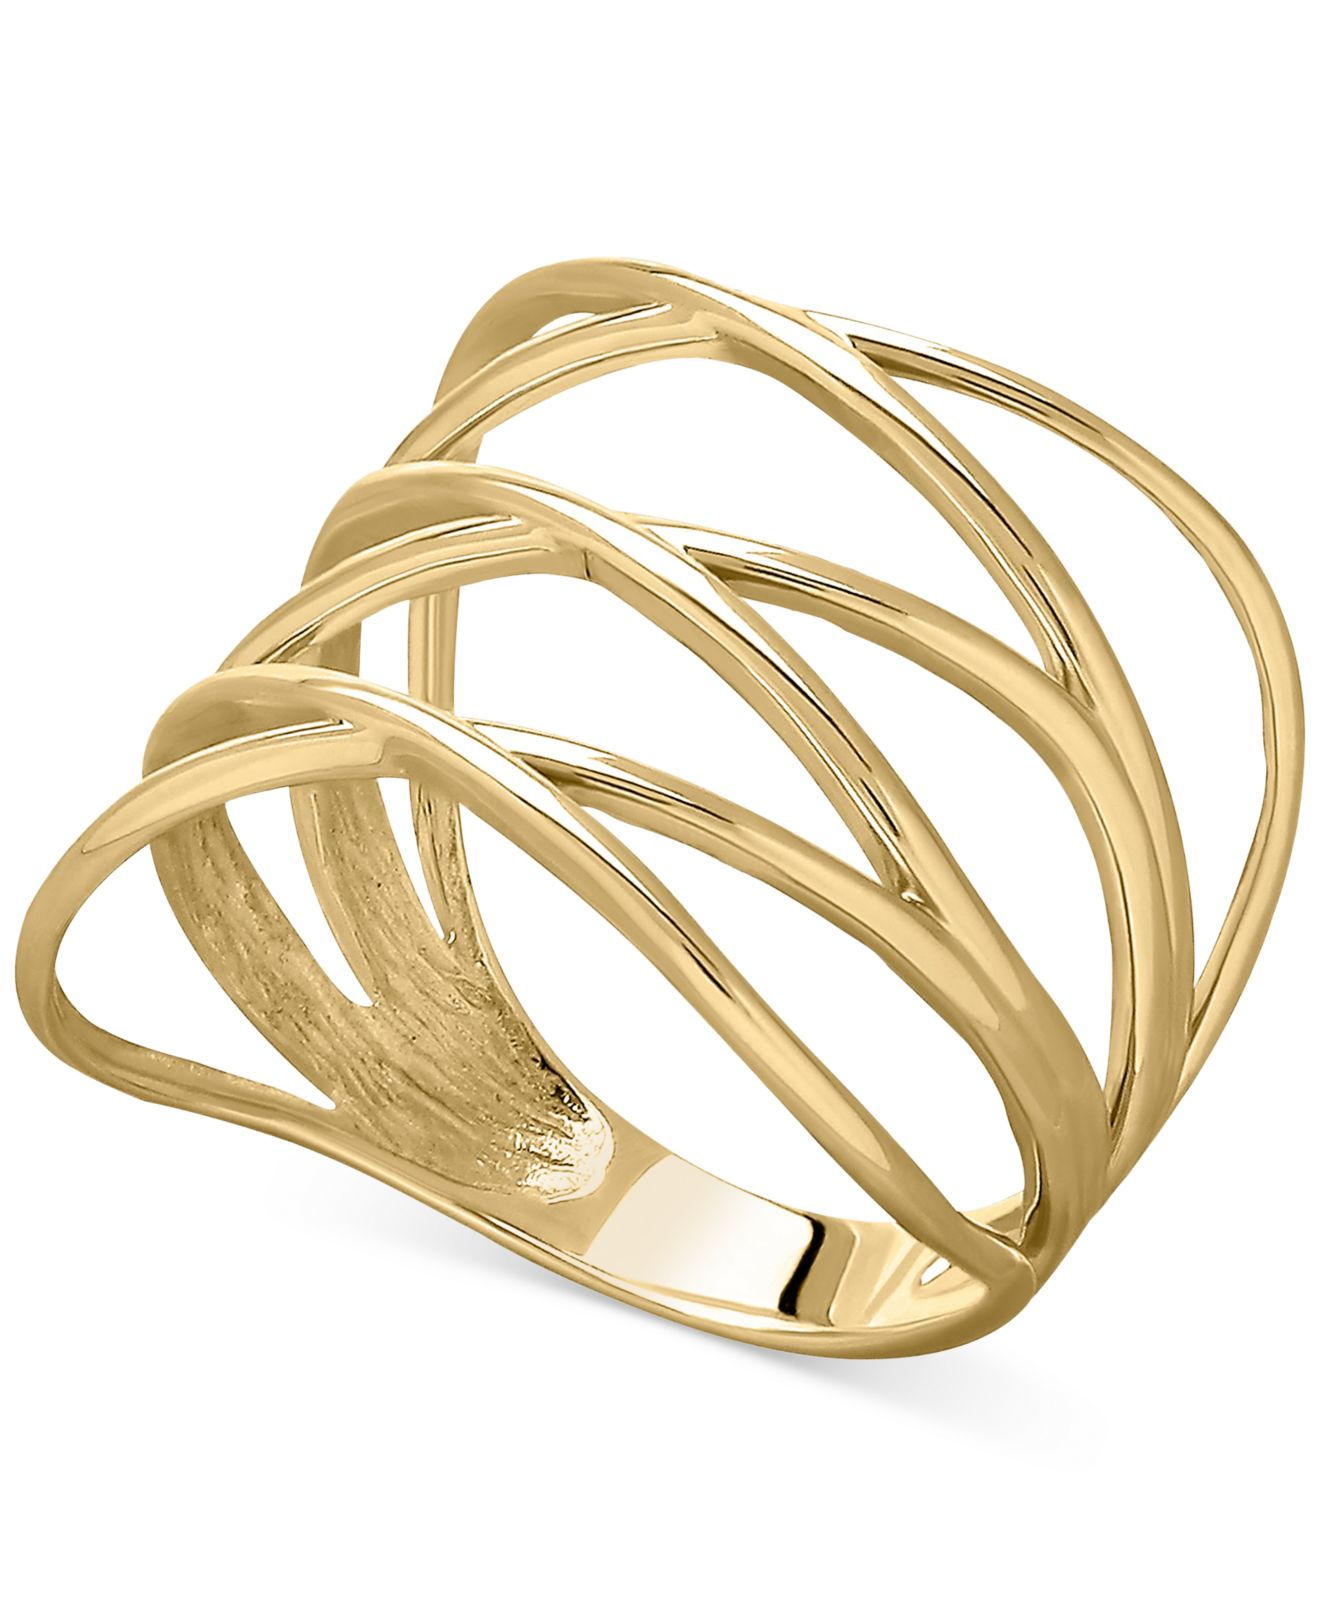  Macy s  Openwork Crossover  Ring  In 14k Gold in Gold Save 